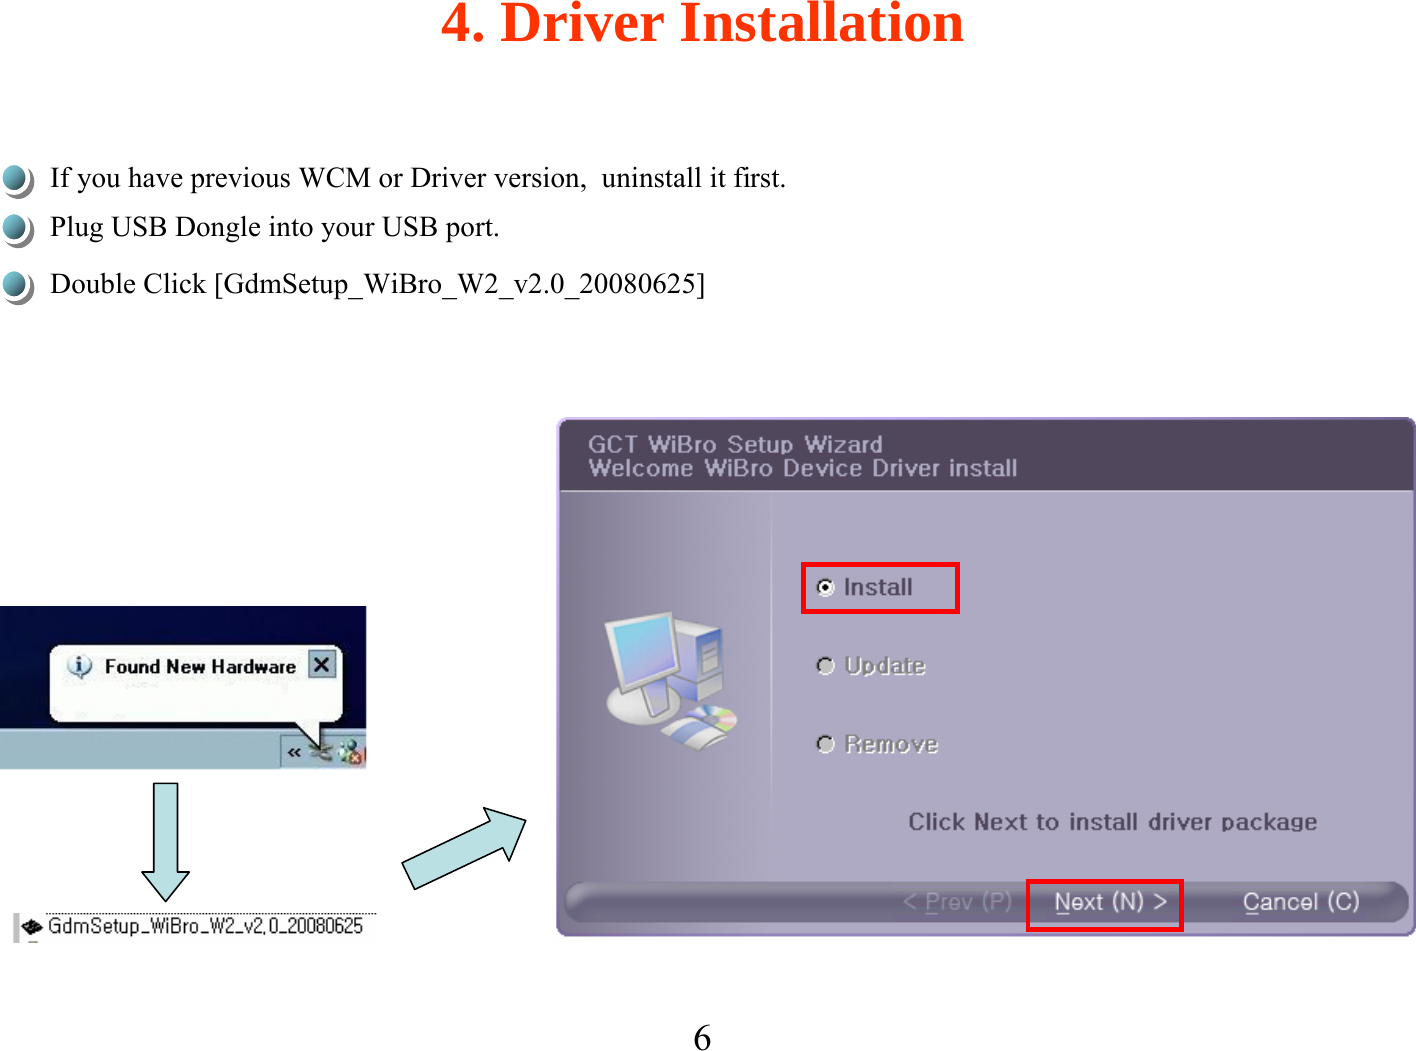 64. Driver InstallationIf you have previous WCM or Driver version,  uninstall it first.Double Click [GdmSetup_WiBro_W2_v2.0_20080625]Plug USB Dongle into your USB port.